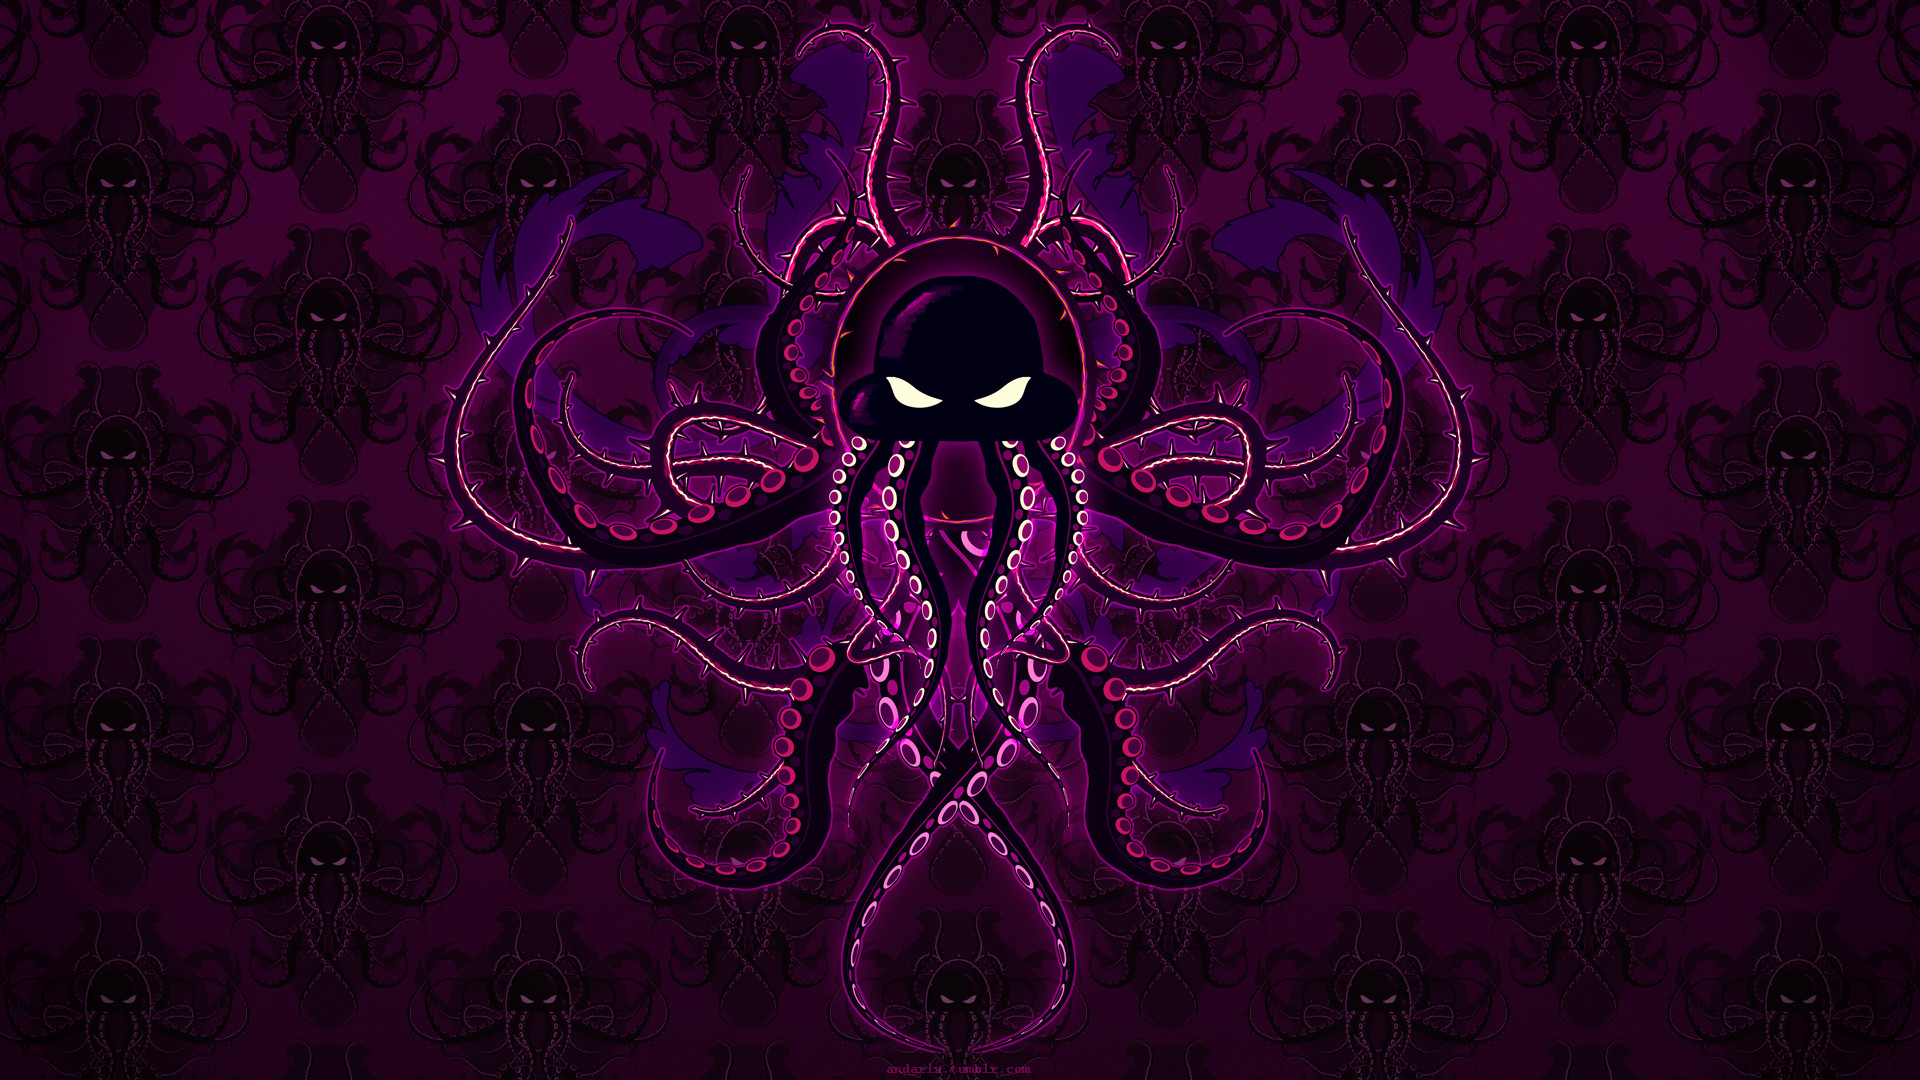 1920x1080 Octopus HD Wallpapers & Pictures | Hd Wallpapers | Full HD Wallpapers |  Pinterest | Wallpaper pictures, Hd wallpaper and Wallpaper